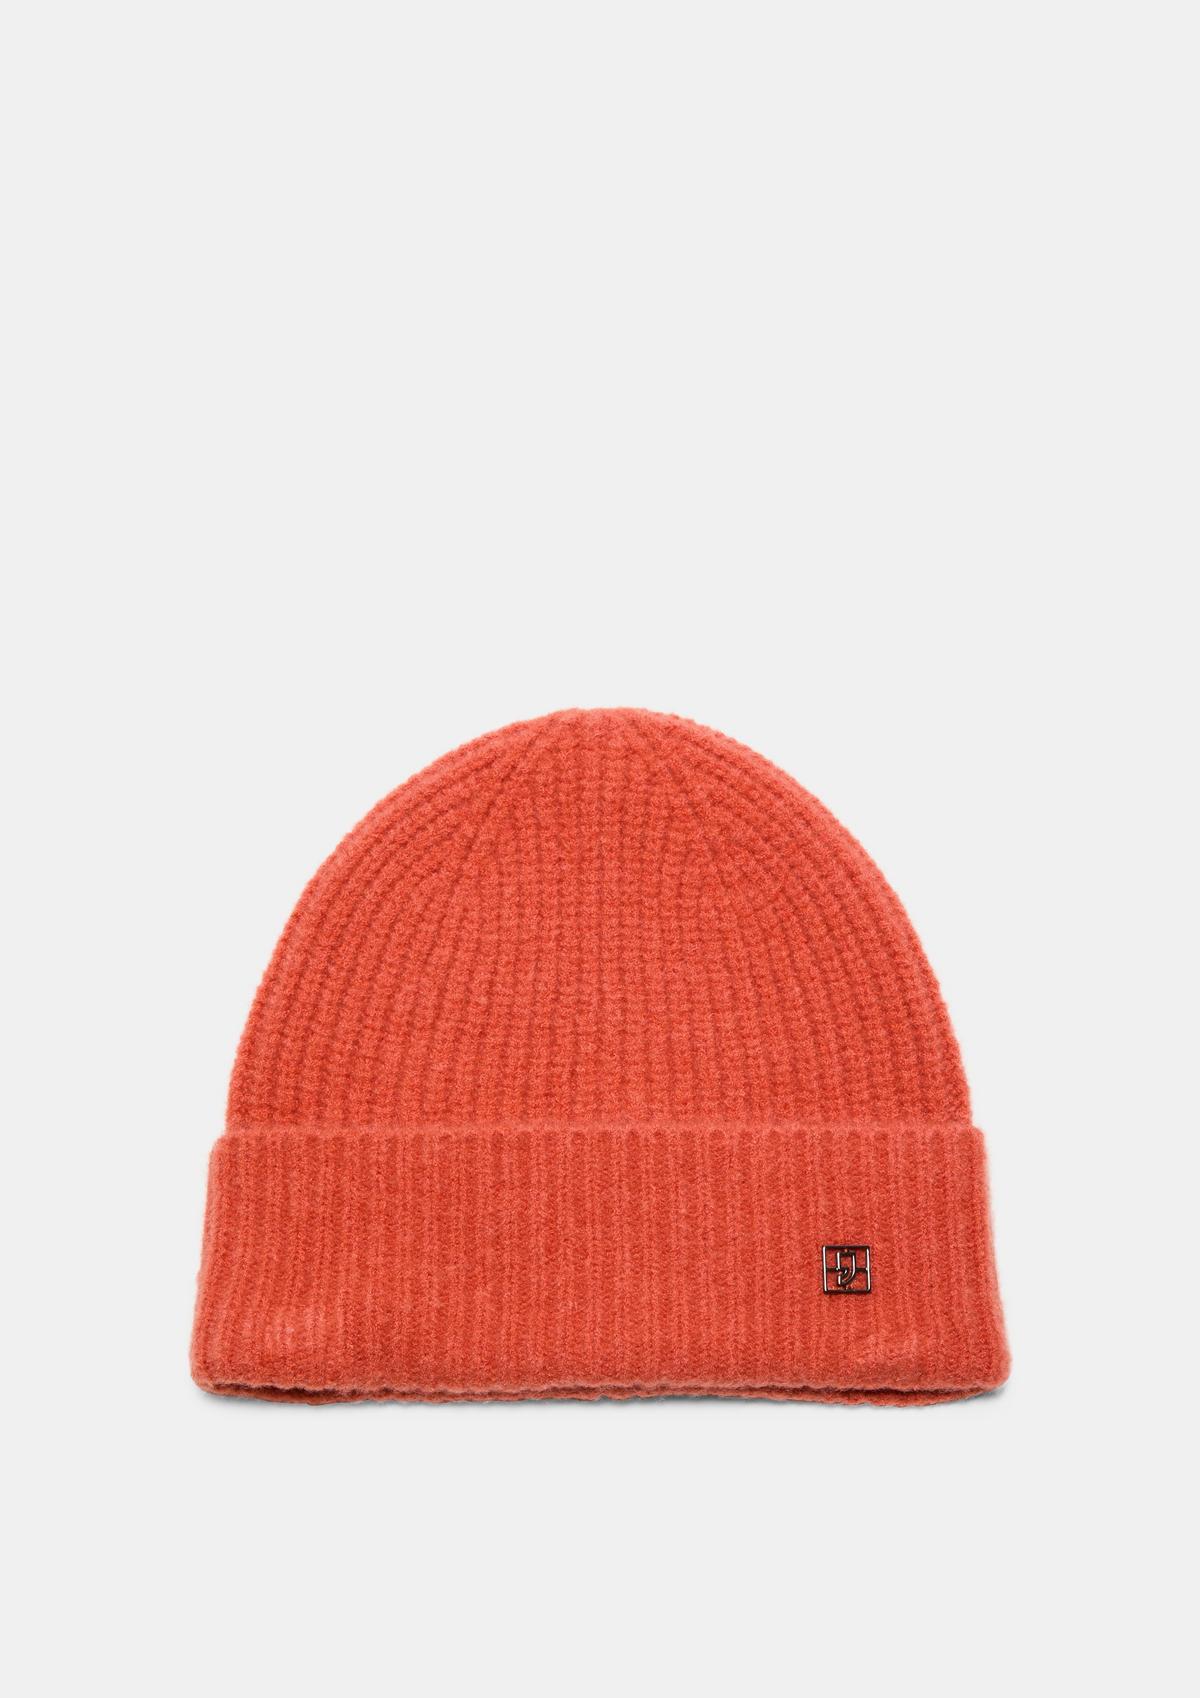 Soft hat with a logo detail